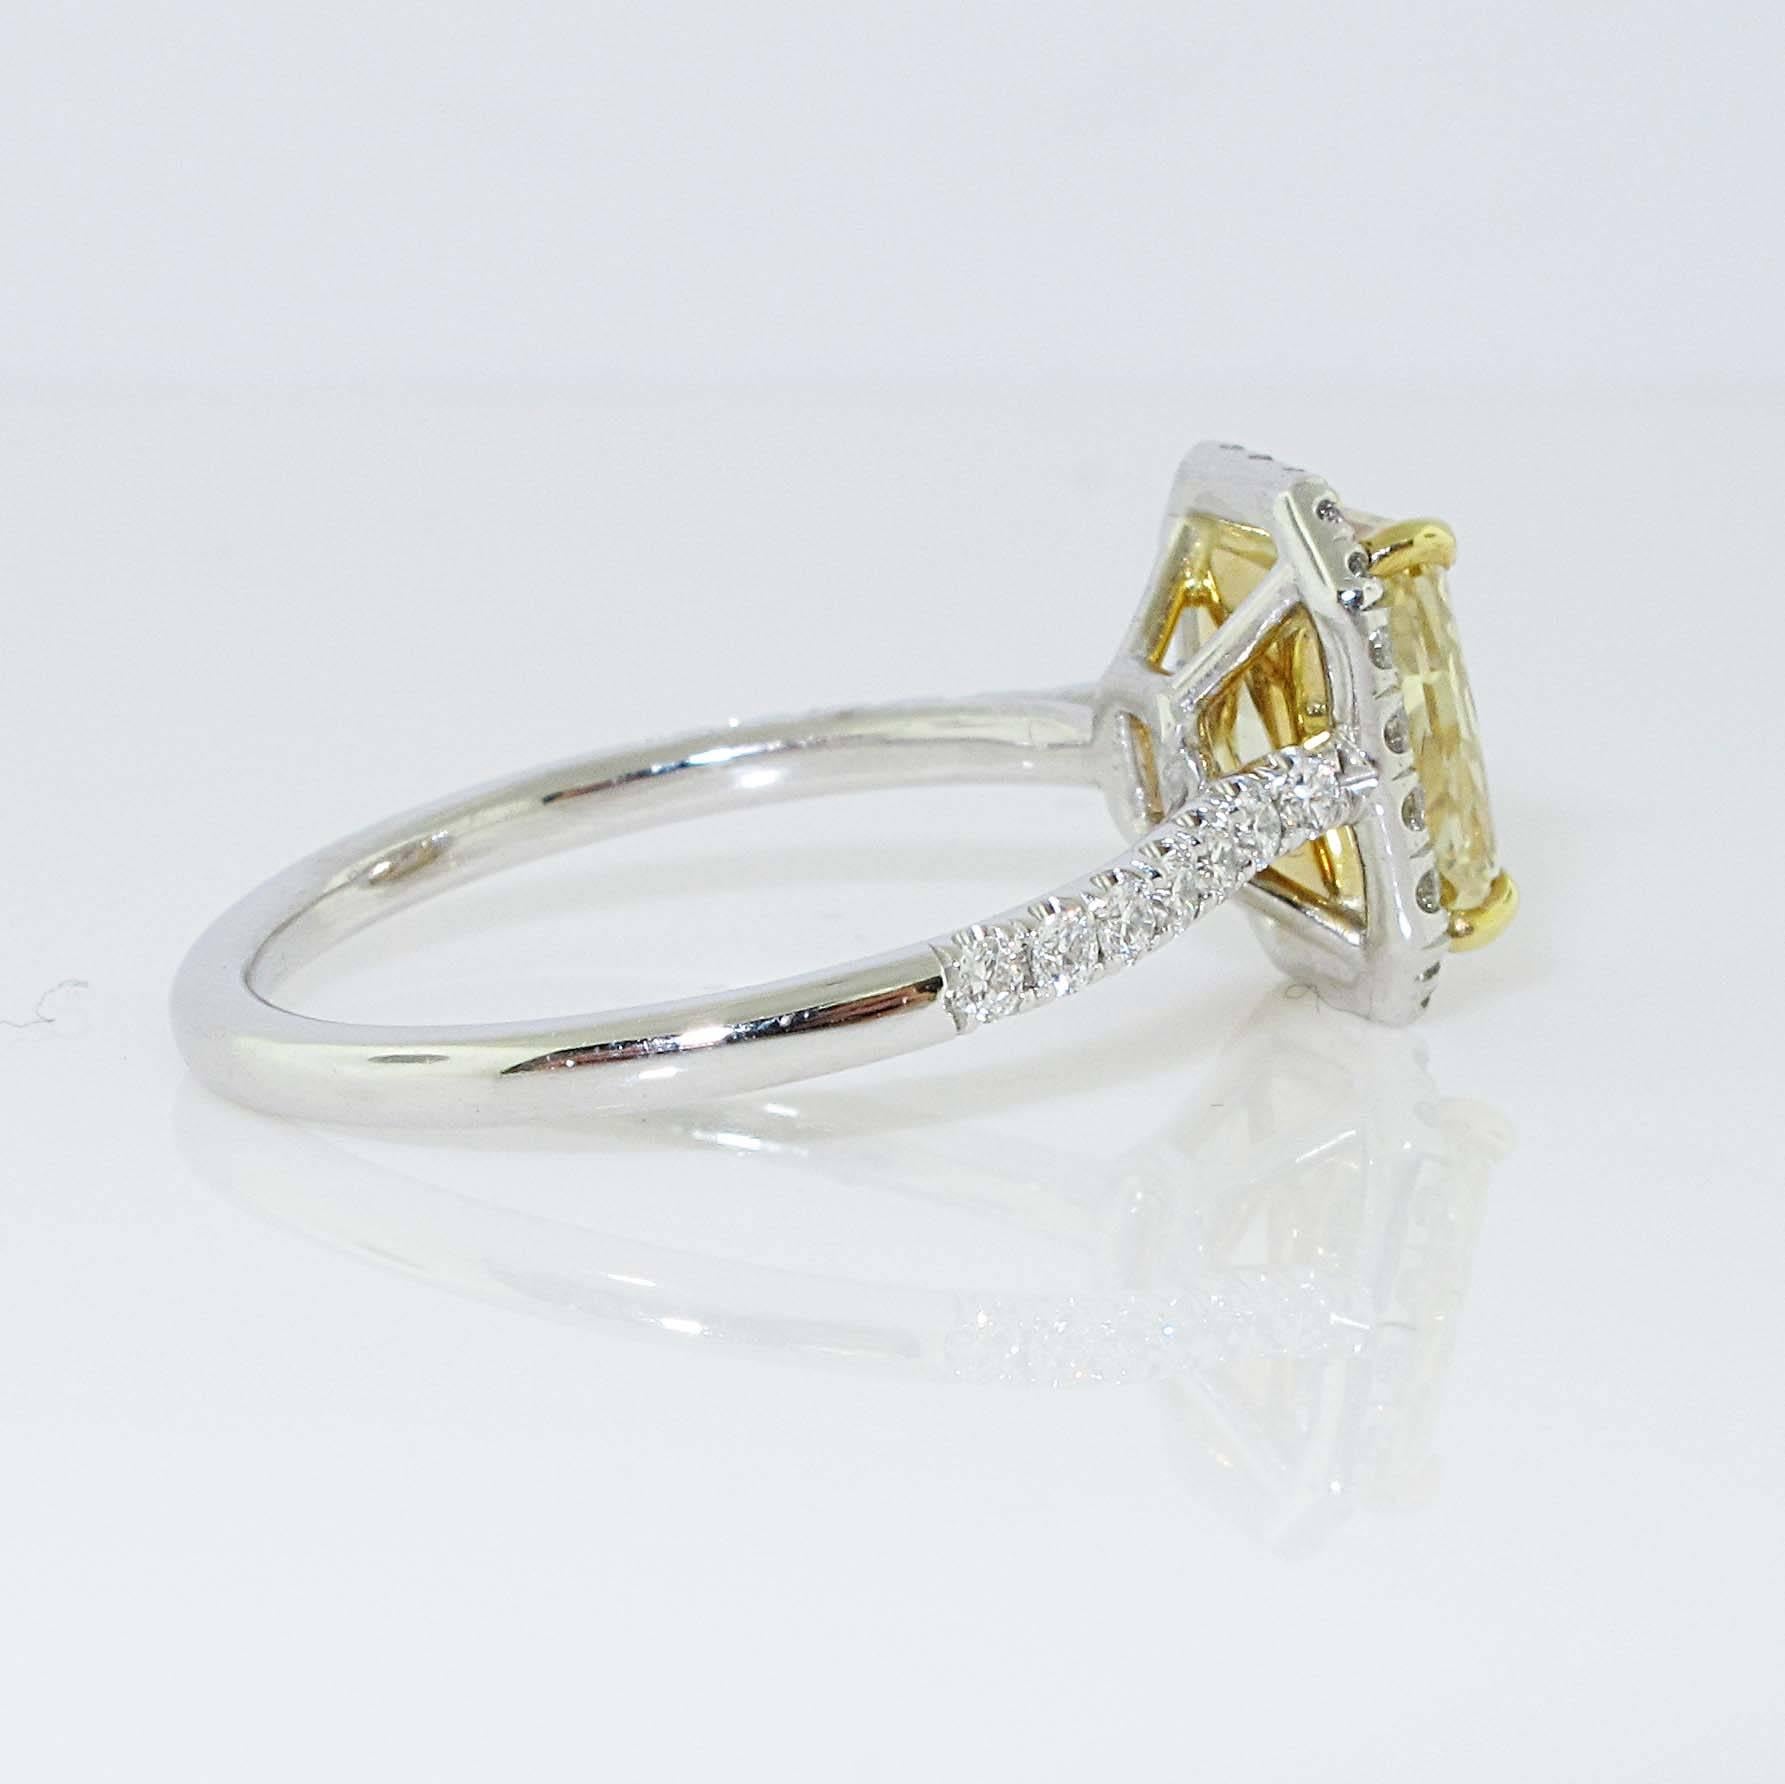 Truly a great colored yellow diamond engagement ring. This 1.67 carat Fancy Yellow Radiant diamond ring is great as either an engagement ring or a fashion ring. Either way you will be the talk of your friends. The mounting is platinum and adorned